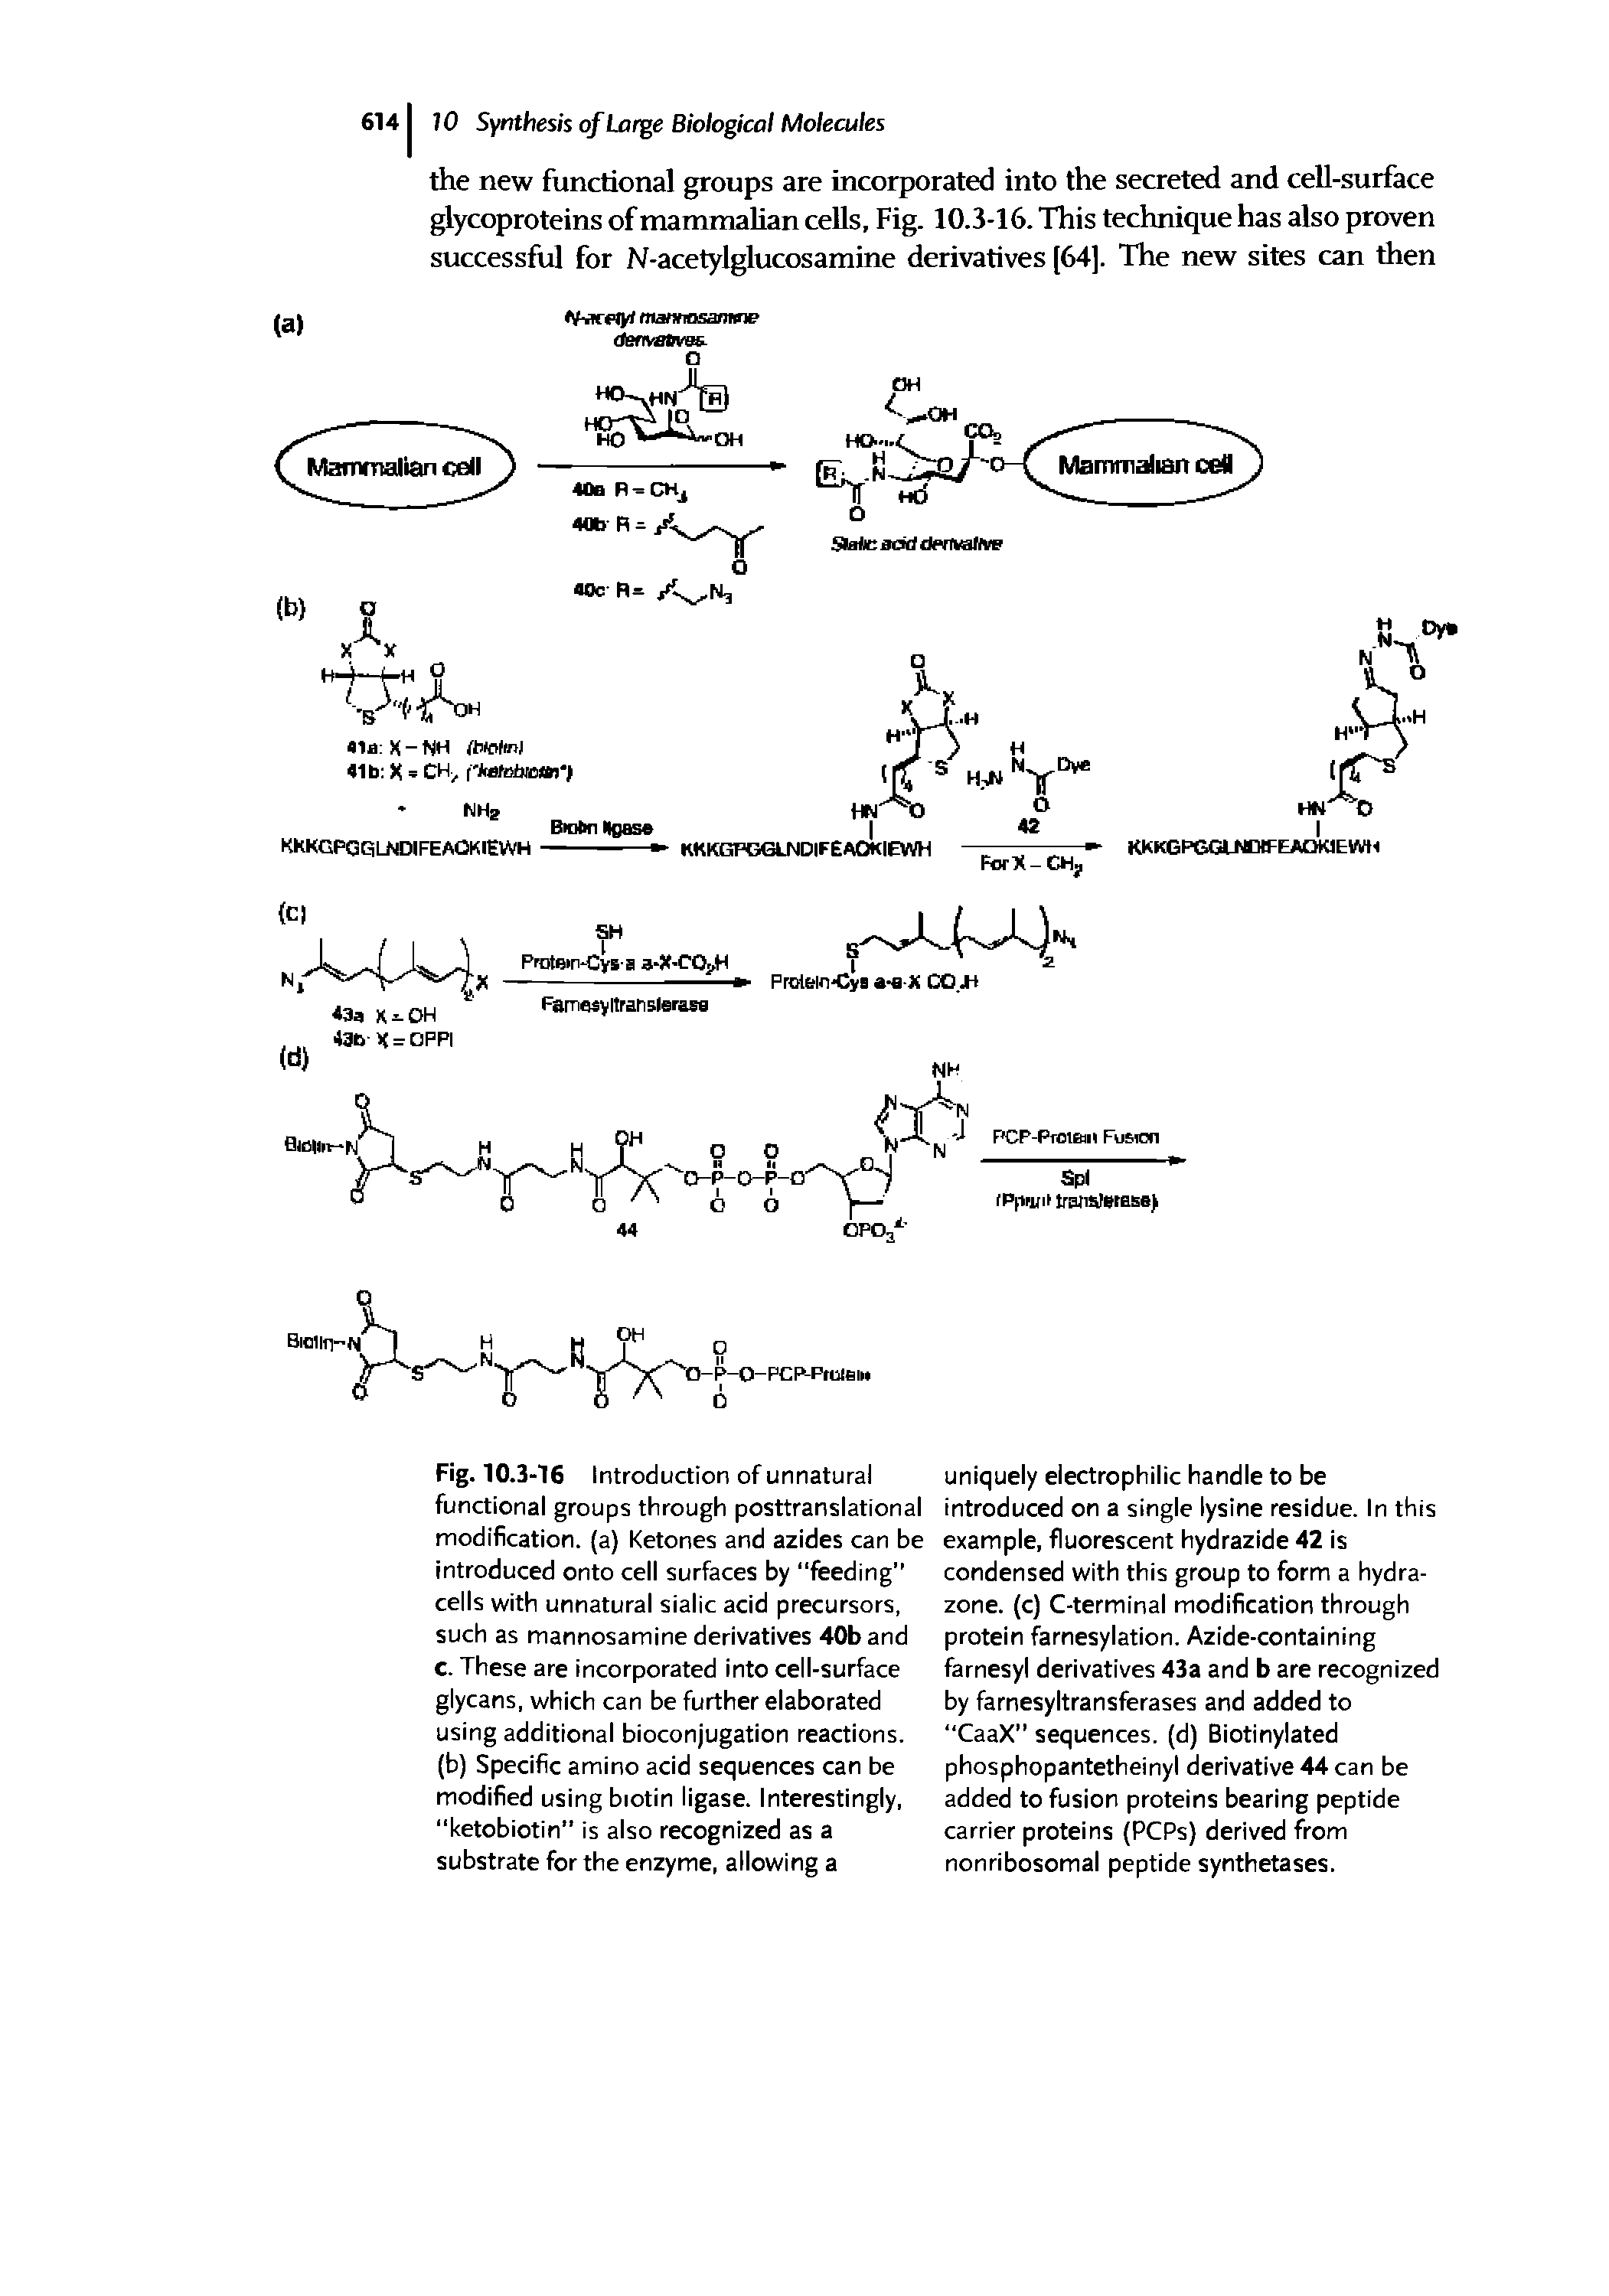 Fig. 10.3-16 Introduction of unnatural functional groups through posttranslational modification, (a) Ketones and azides can be introduced onto cell surfaces by feeding cells with unnatural sialic acid precursors, such as mannosamine derivatives 40b and c. These are incorporated into cell-surface glycans, which can be further elaborated using additional bioconjugation reactions, (b) Specific amino acid sequences can be modified using biotin ligase. Interestingly, ketobiotin" is also recognized as a substrate for the enzyme, allowing a...